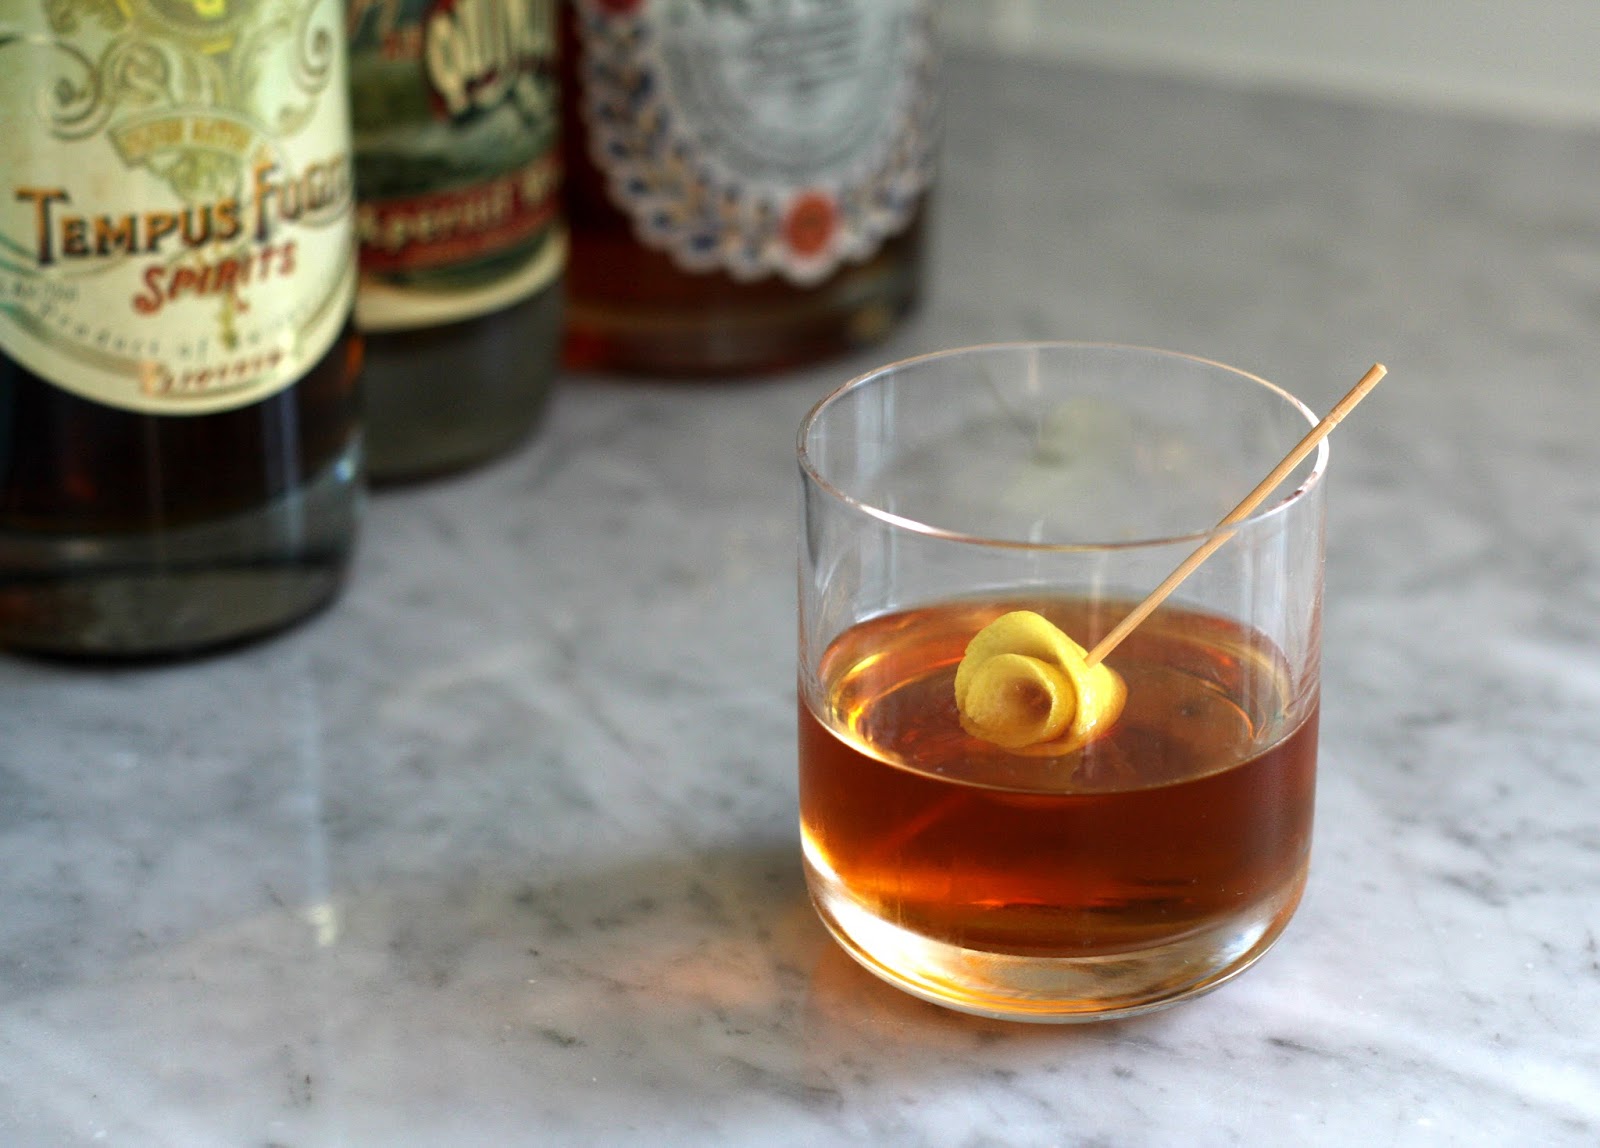 Mixology Monday: The Innocents Abroad